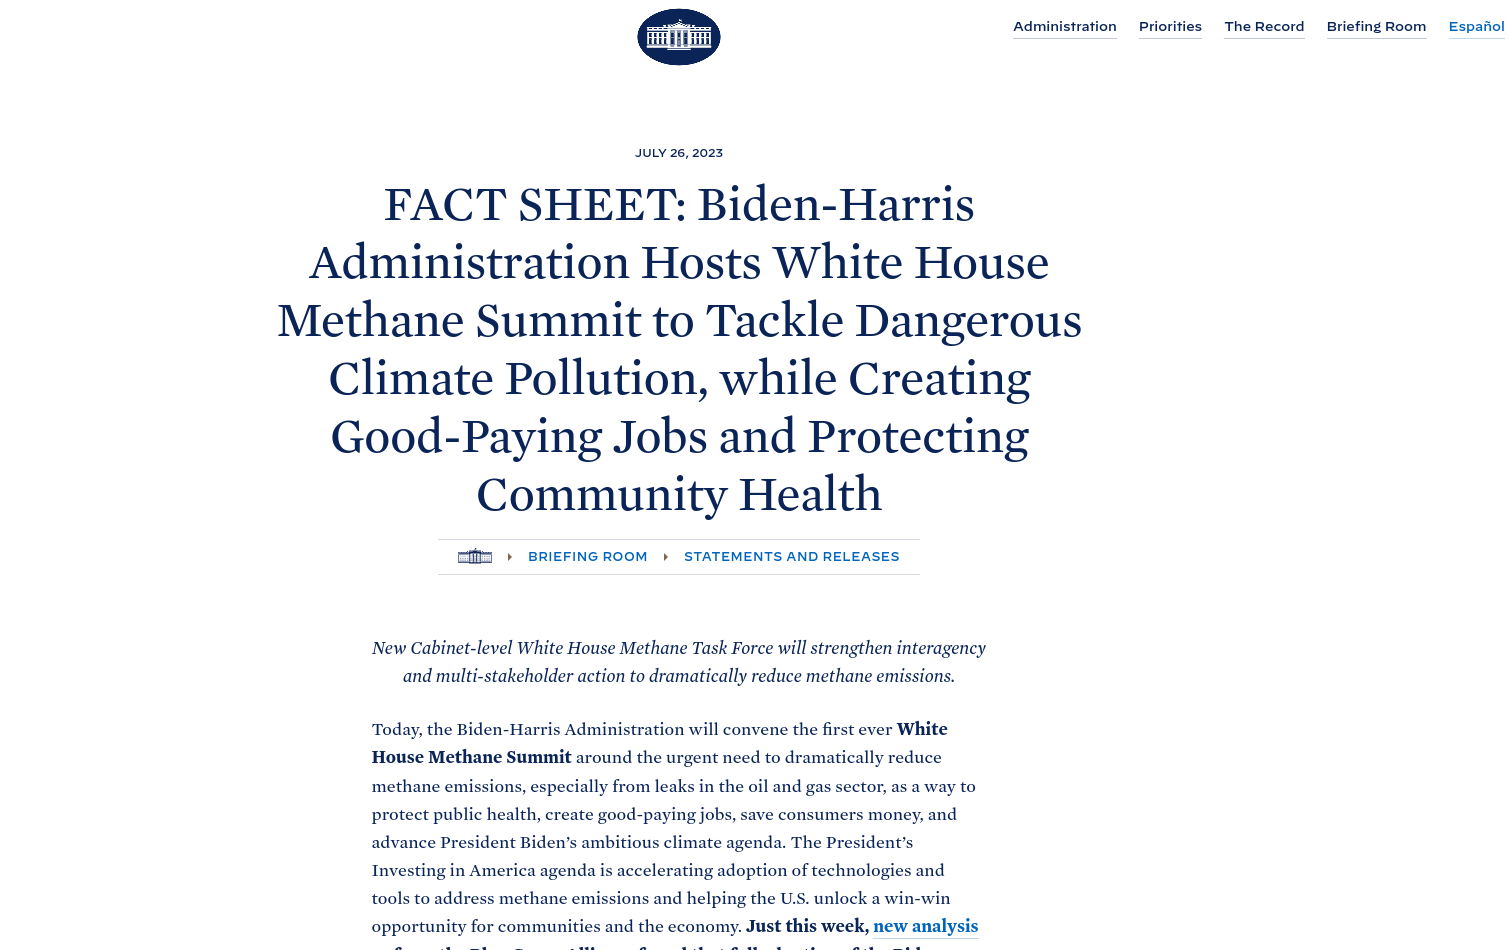 The White House - FACT SHEET: Biden-⁠Harris Administration Hosts White House Methane Summit to Tackle Dangerous Climate Pollution, while Creating Good-Paying Jobs and Protecting Community Health